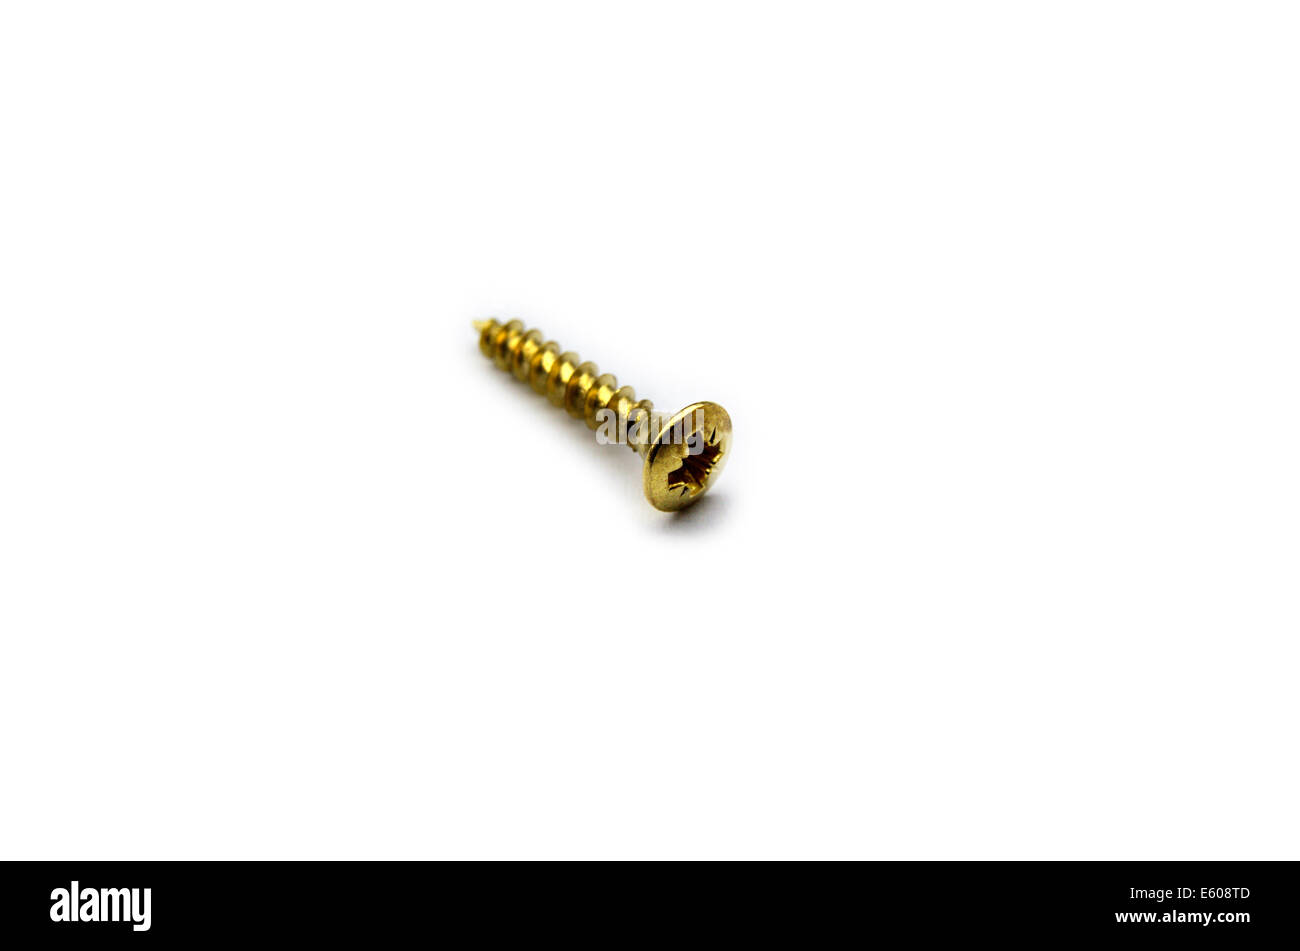 Yellow Brass Screw With a Philips Crosshead Isolated On White Stock Photo